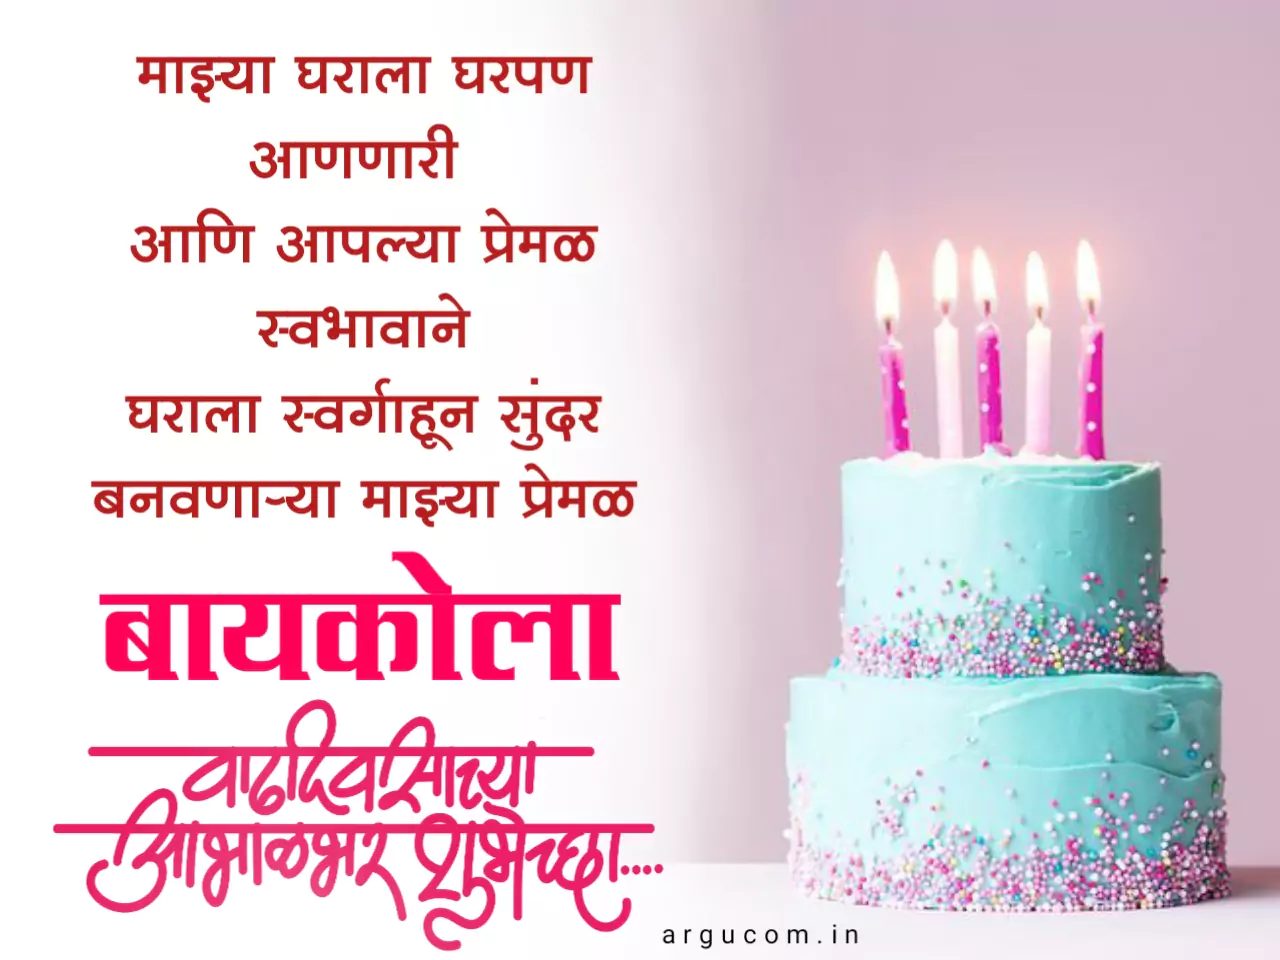 Happy birthday images in marathi for wife 